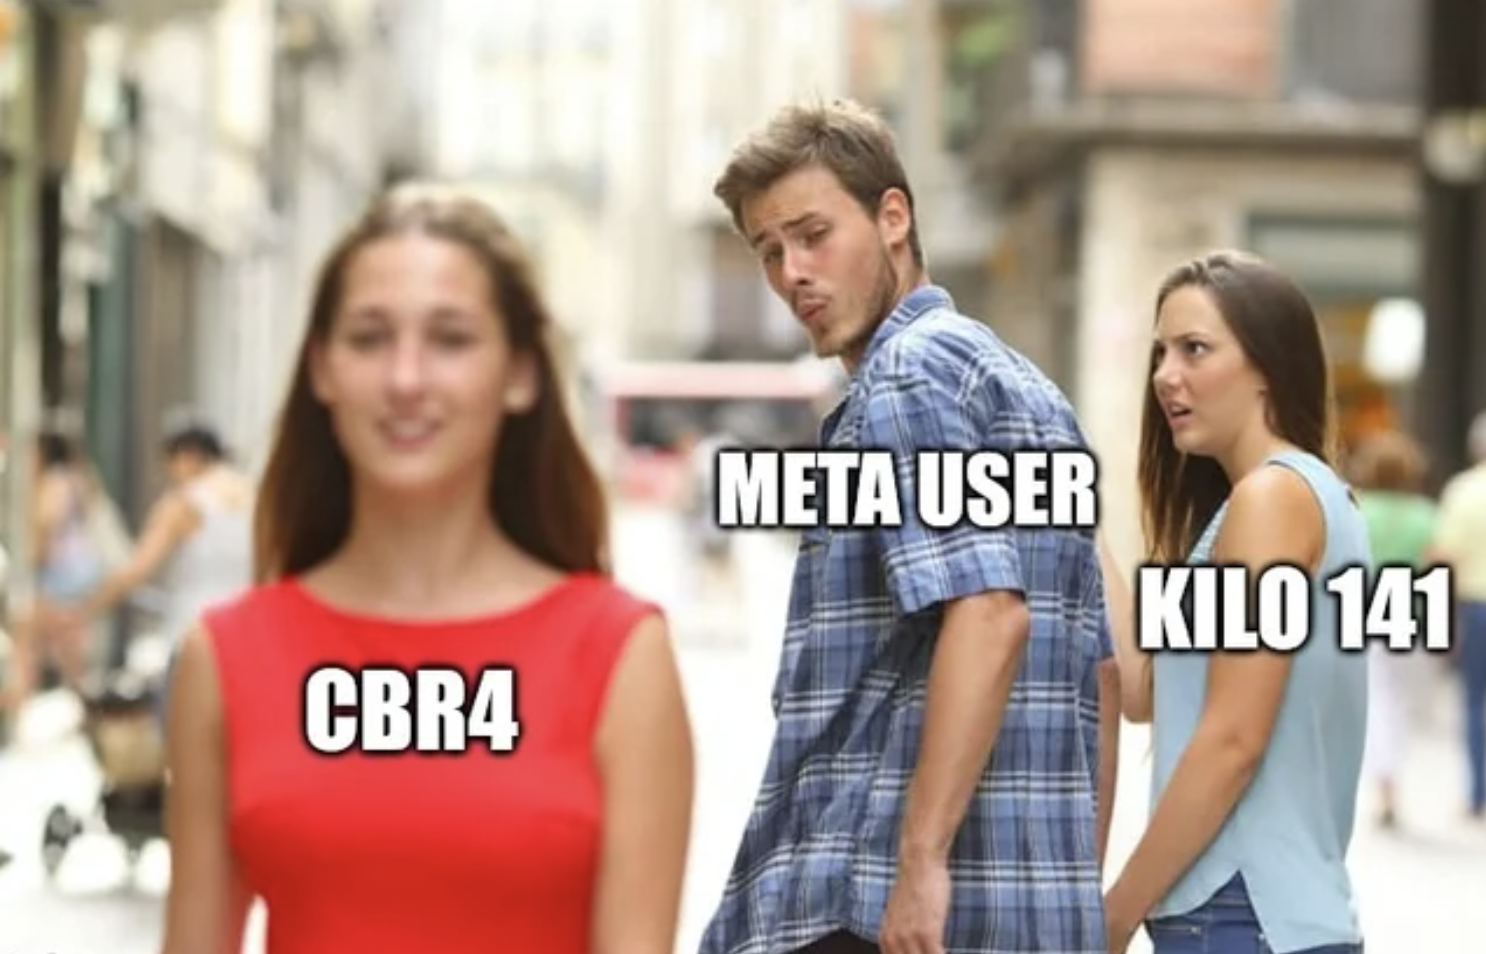 Call of Duty Memes - system 1 and system 2 meme - CBR4 Meta User